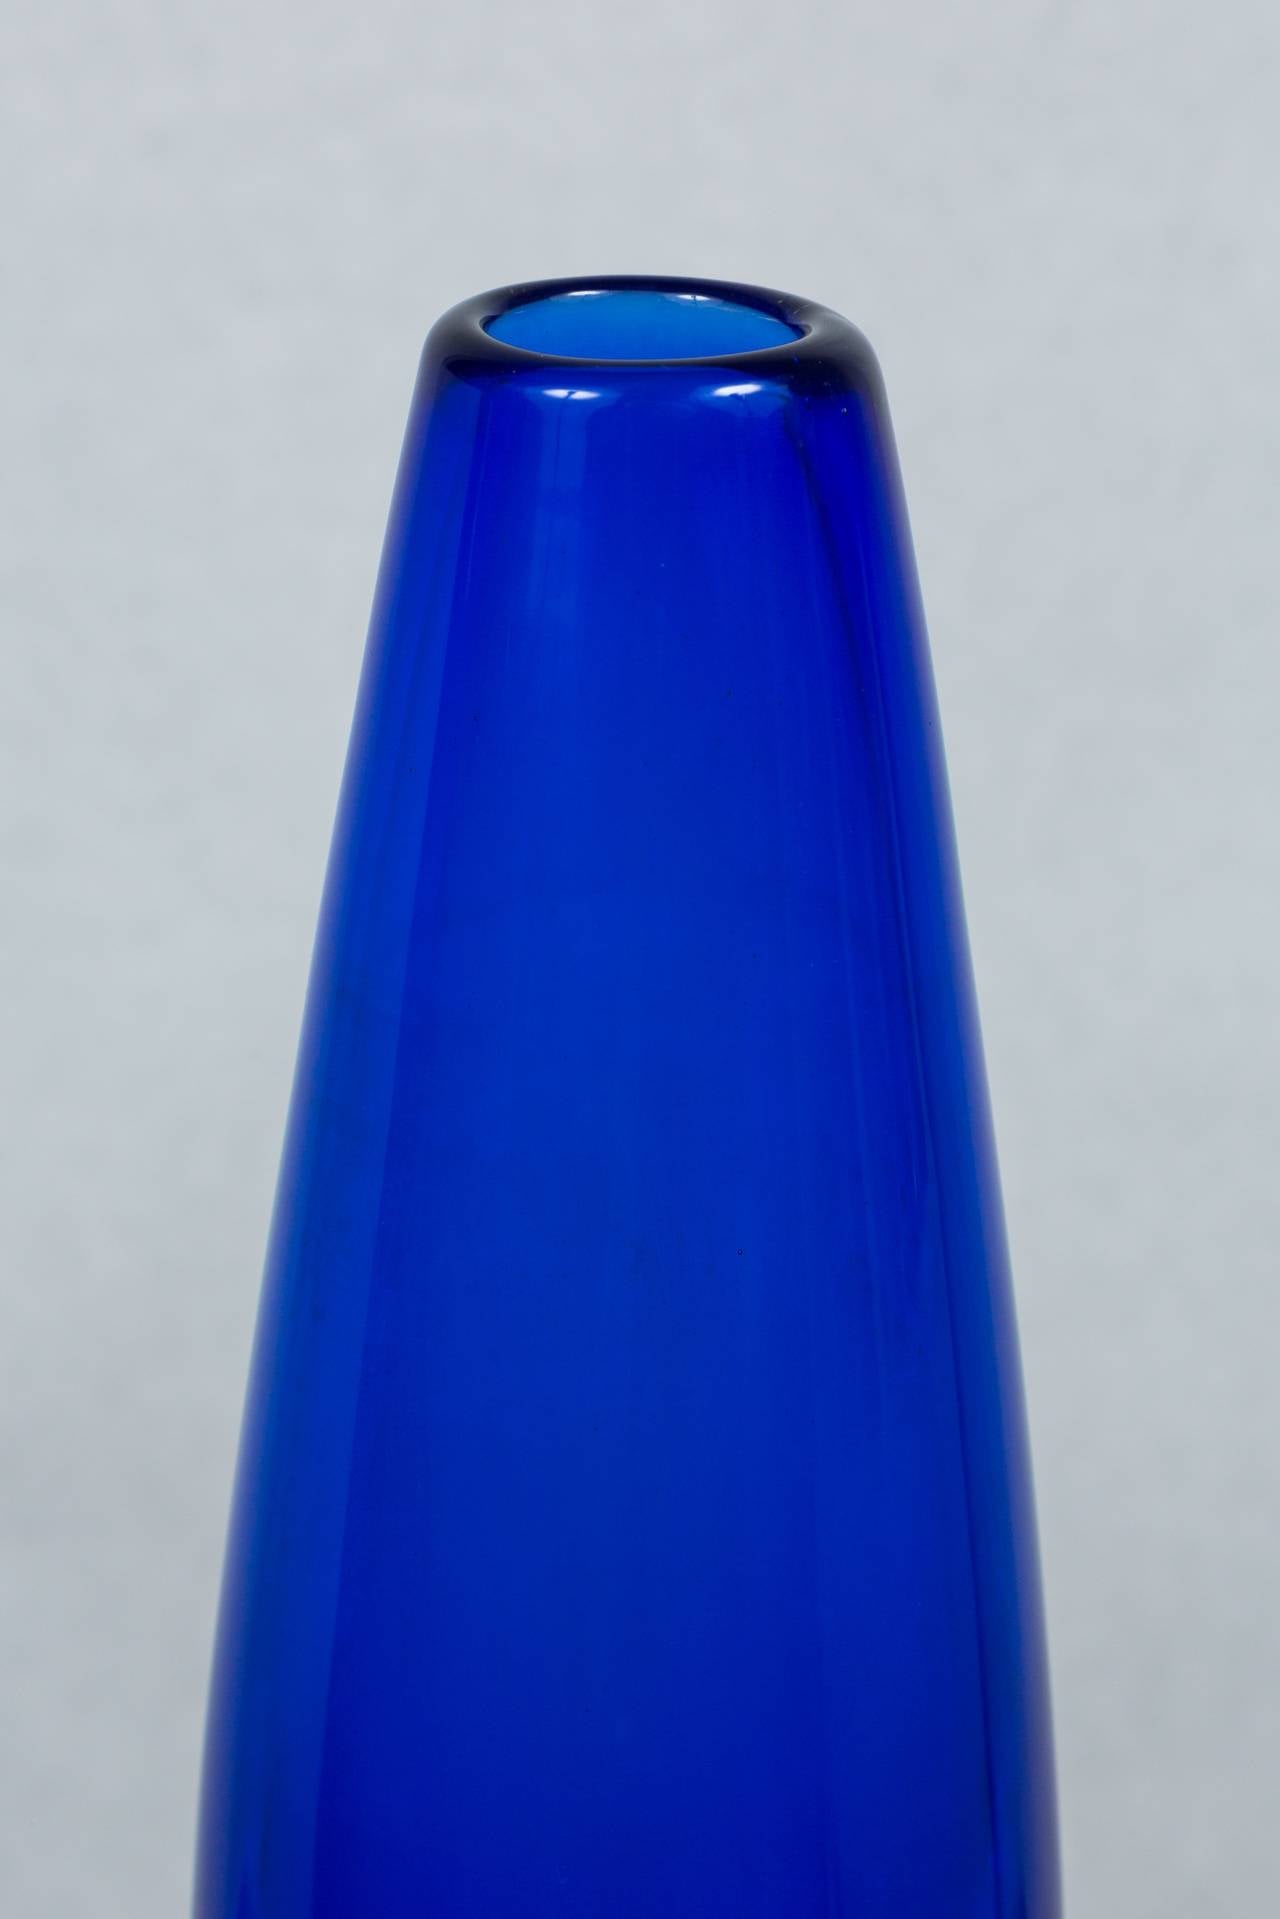 Elegant Murano Sommerso vase in a brilliant cobalt blue with purple, turquoise and clear glass. Vase is in excellent condition with the exception of some residual interior water marks from use.  Total dimensions of: 15.5